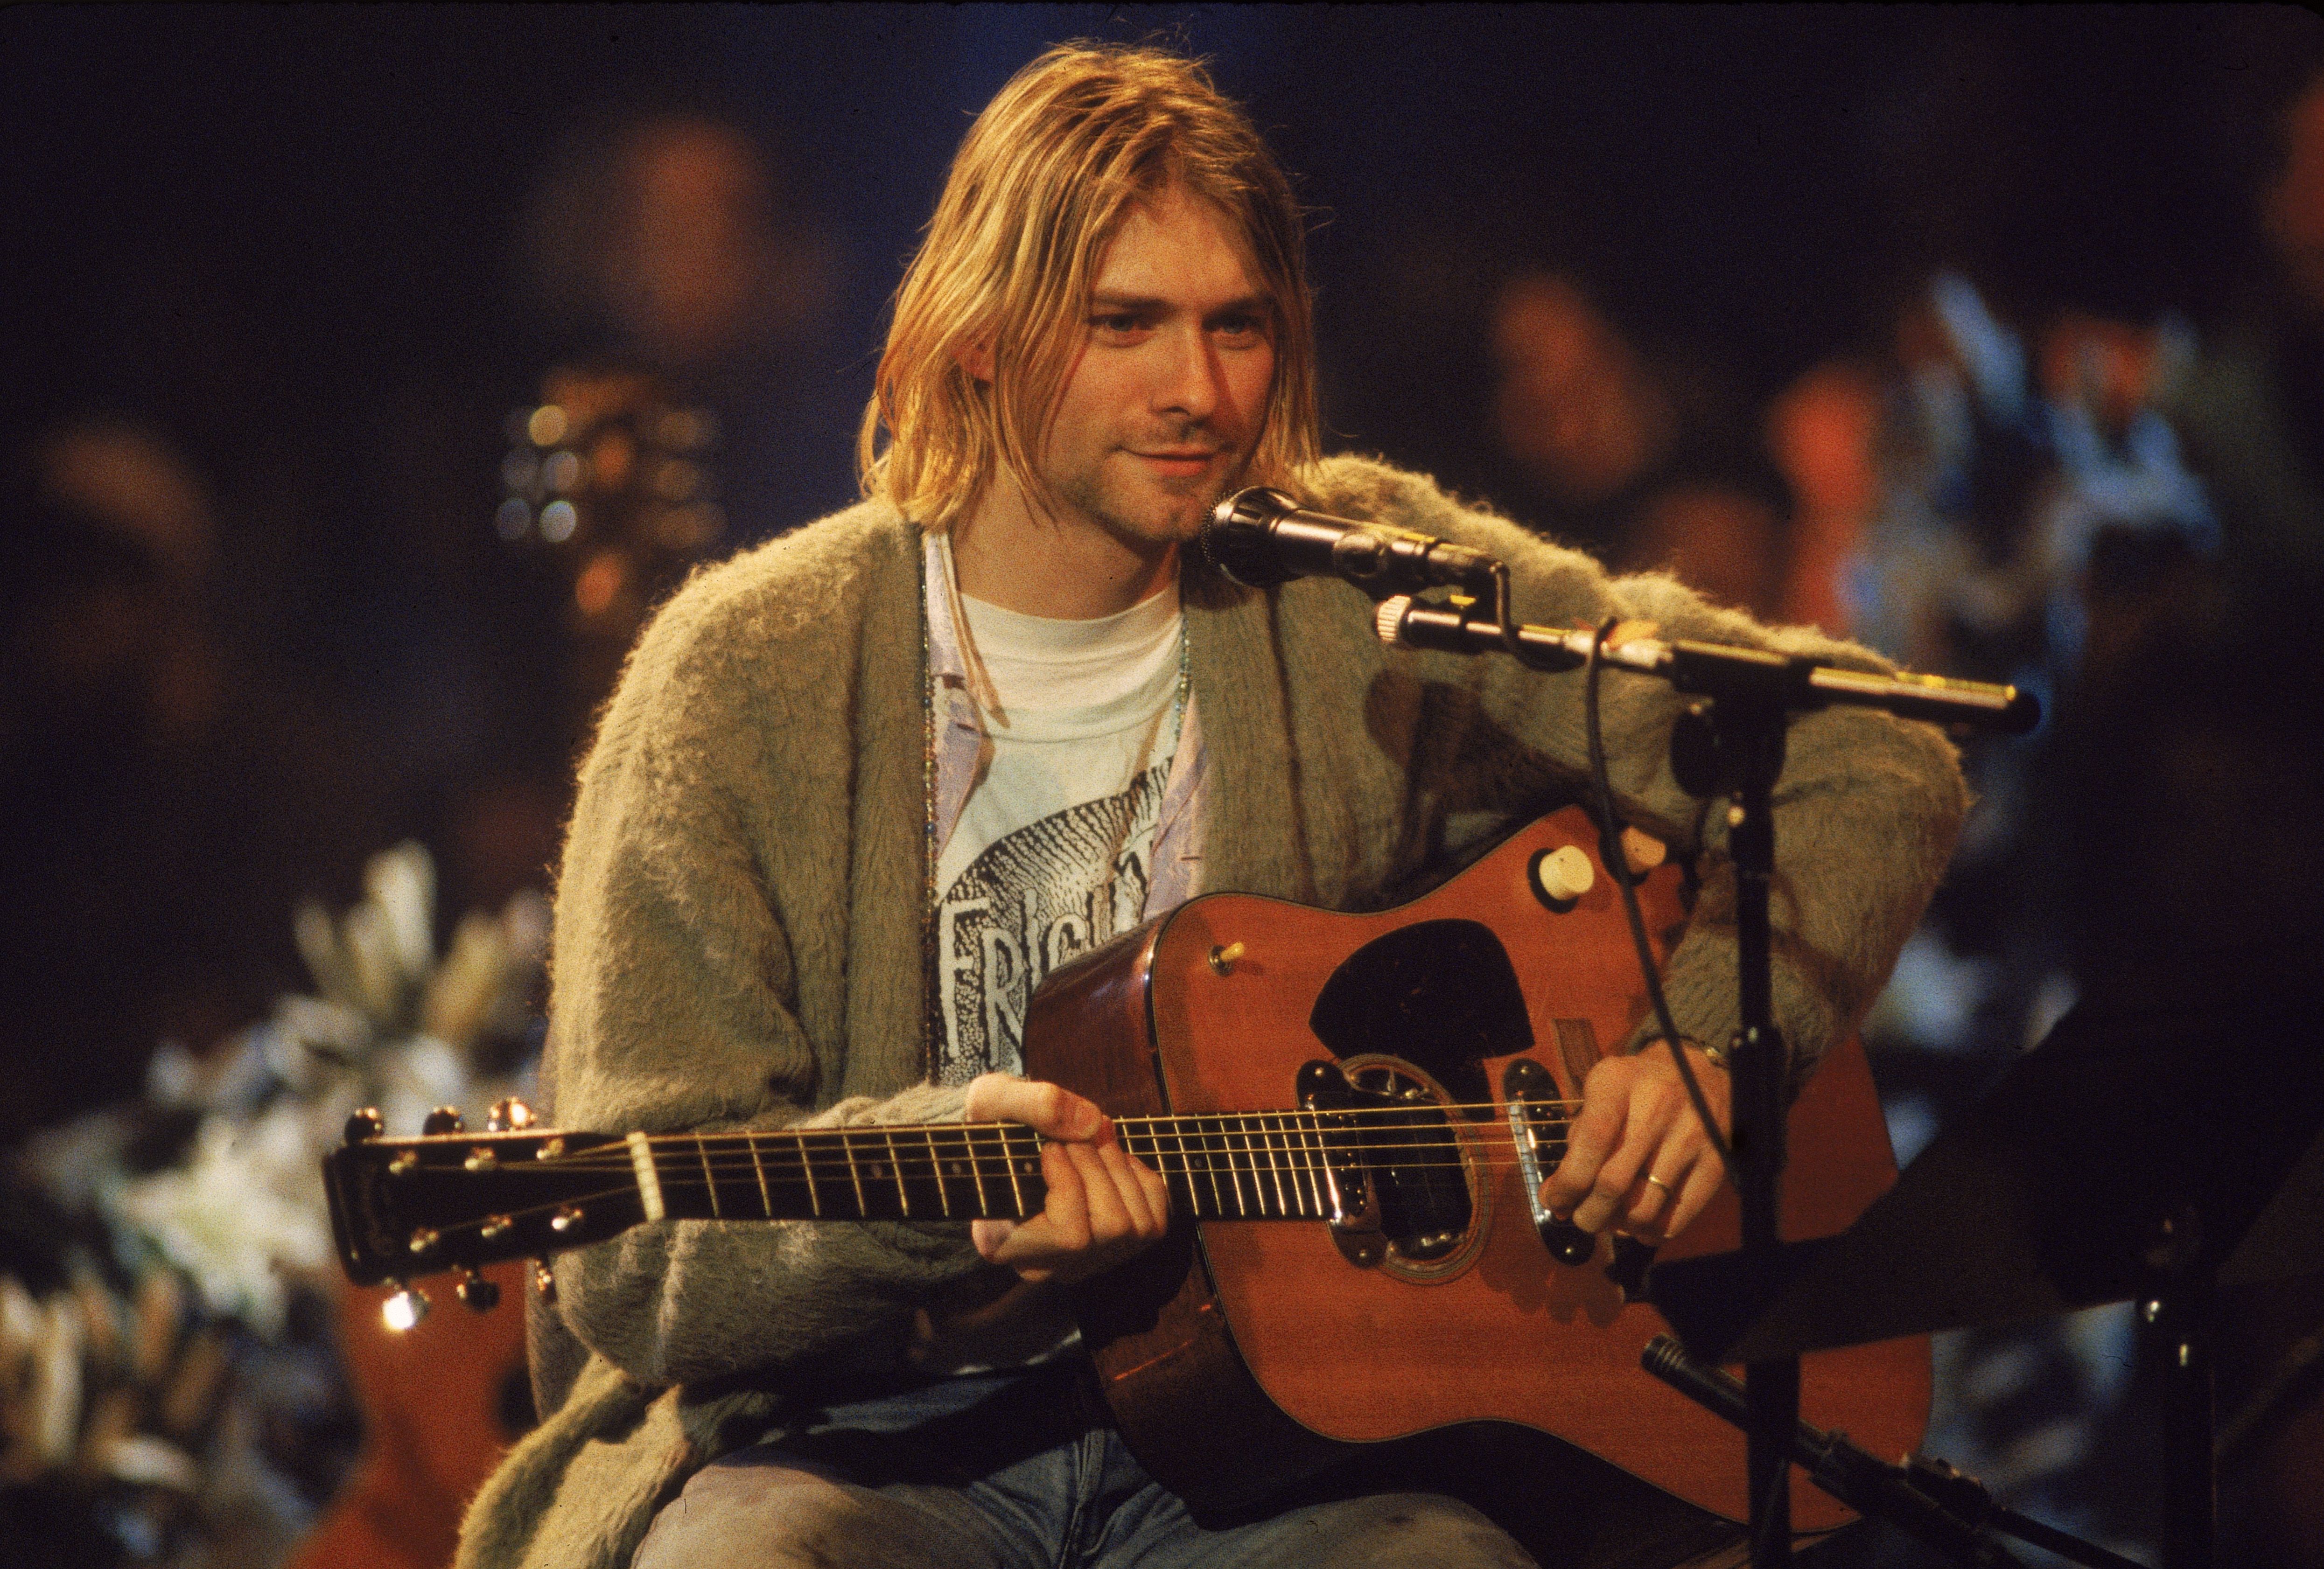 Kurt Cobain performs with his group Nirvana at a taping of the television program "MTV Unplugged." | Source: Getty Images